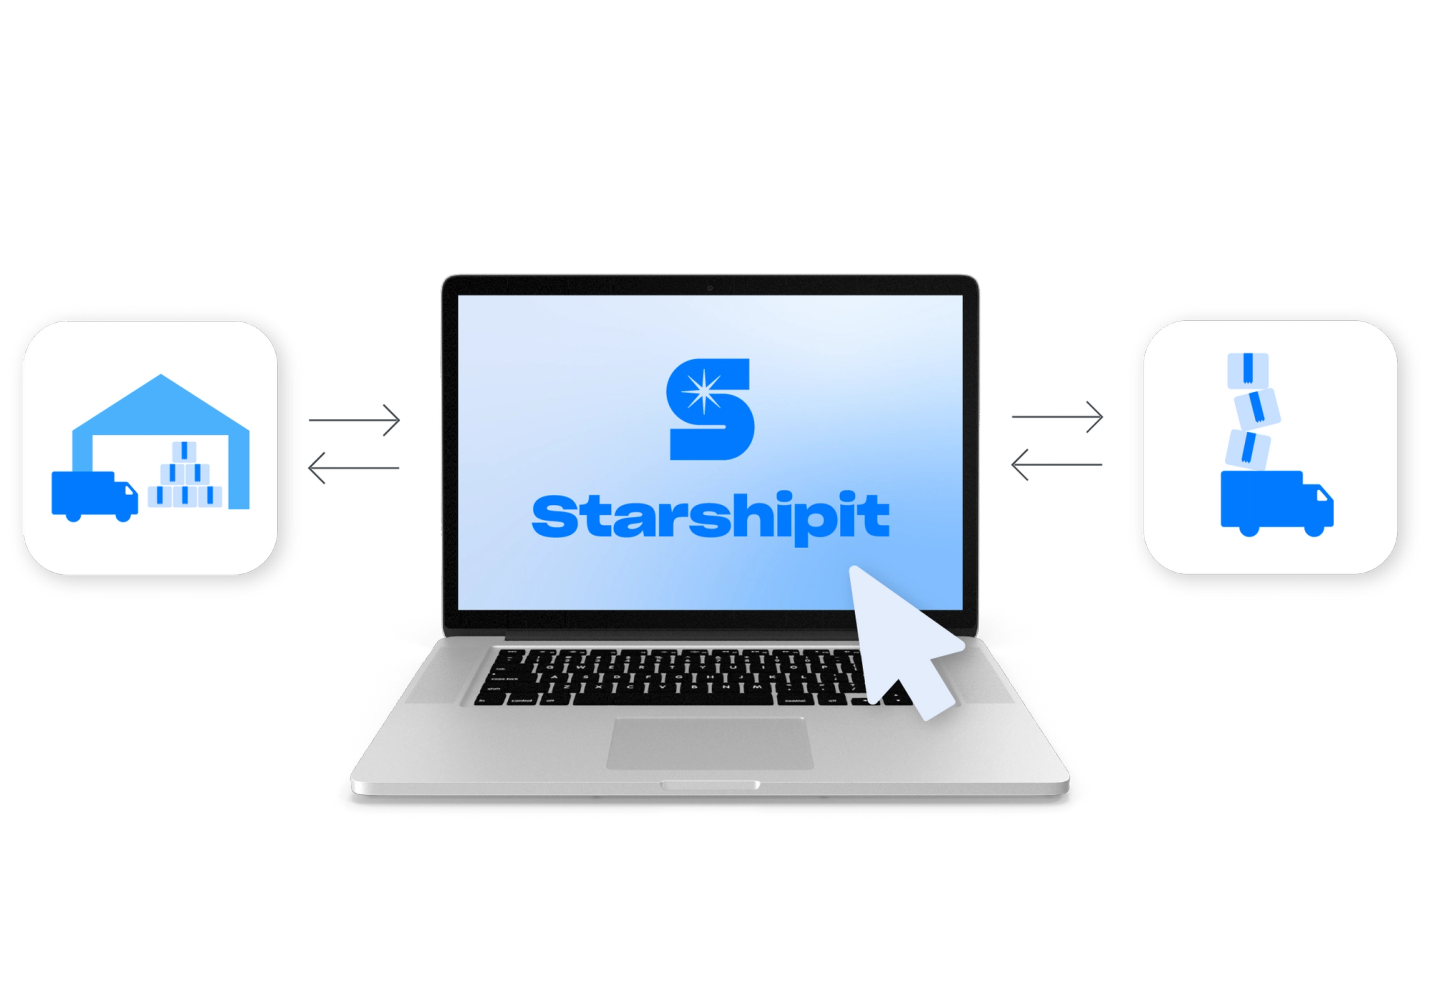 Starshipit's write-back feature let's you automatically update the order status and tracking number in the source platform.